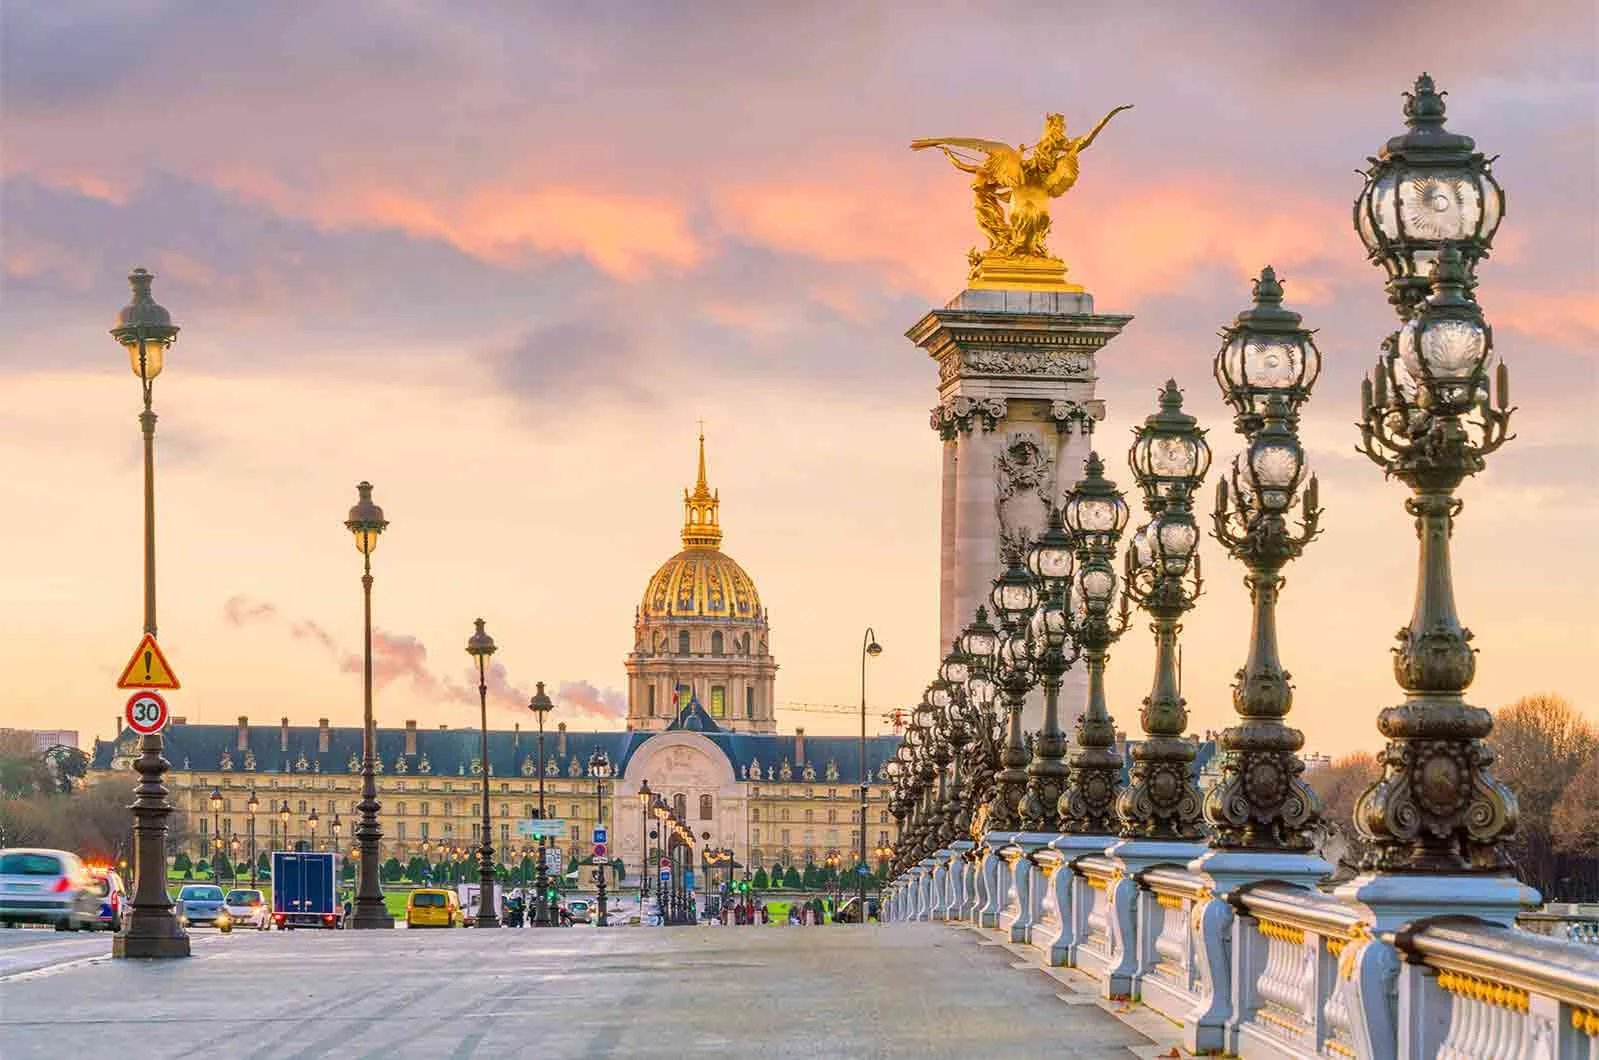 Spectacular sunrise view of the Alexander III Bridge across the Seine. Concept of French translation service.